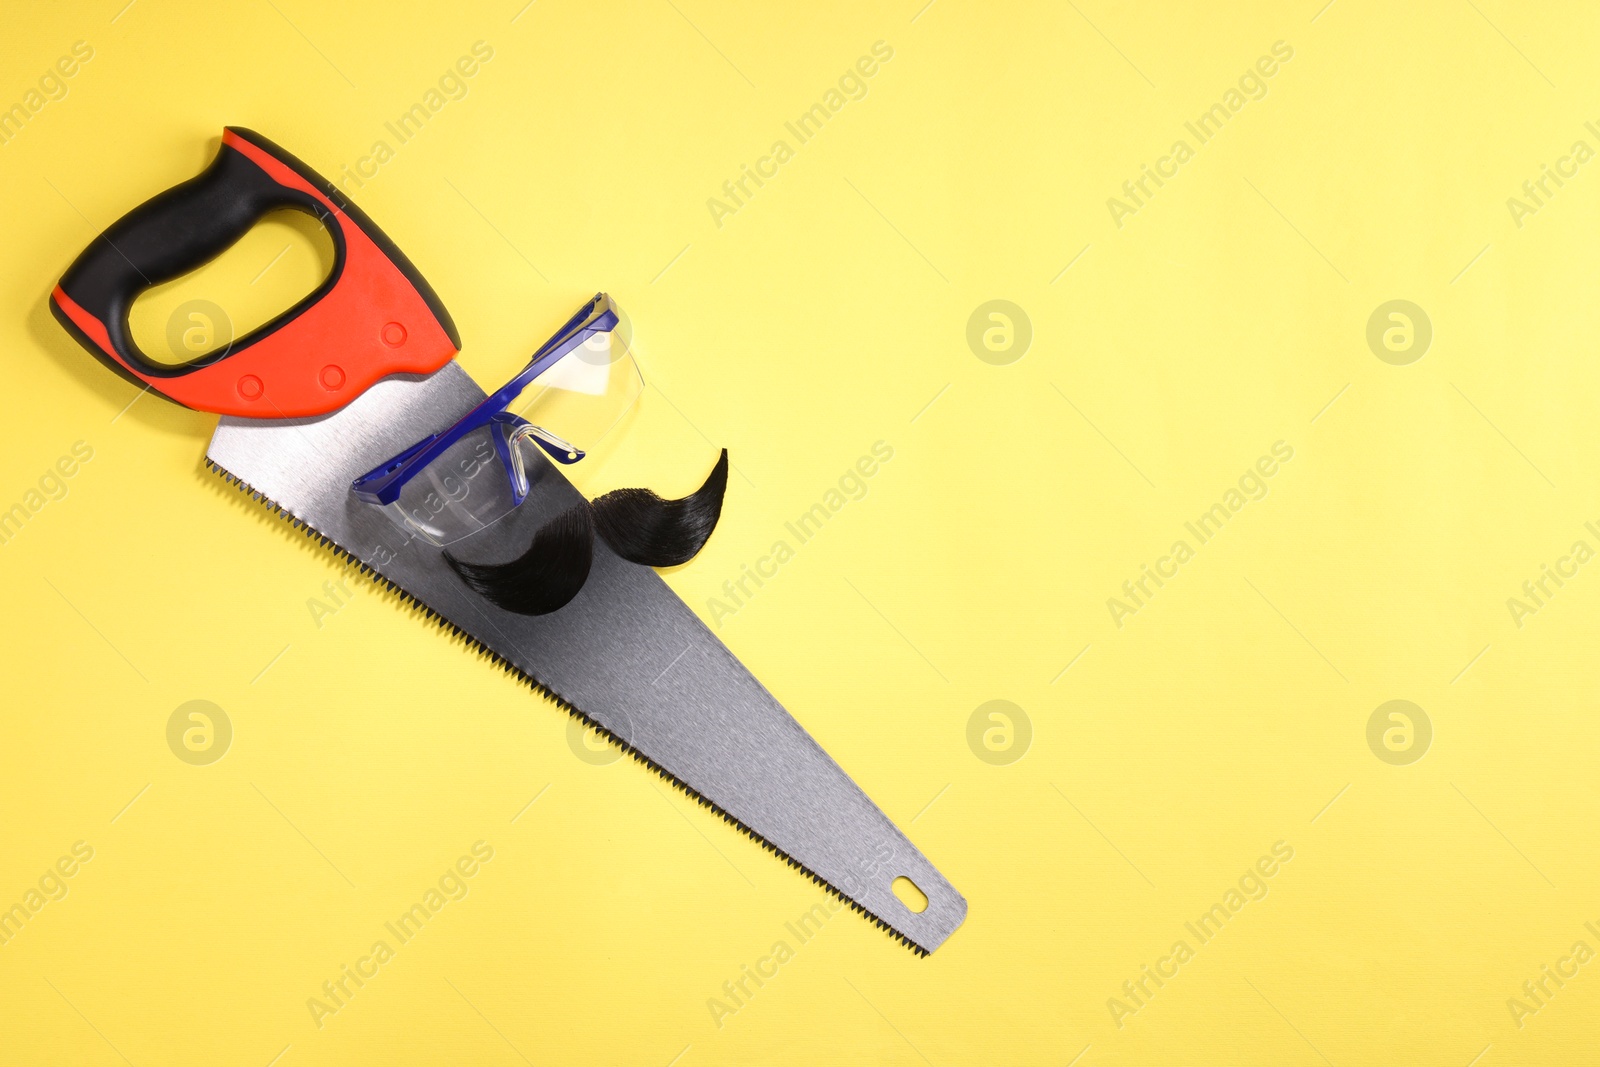 Photo of Man's face made of artificial mustache, safety glasses and hand saw on yellow background, top view. Space for text